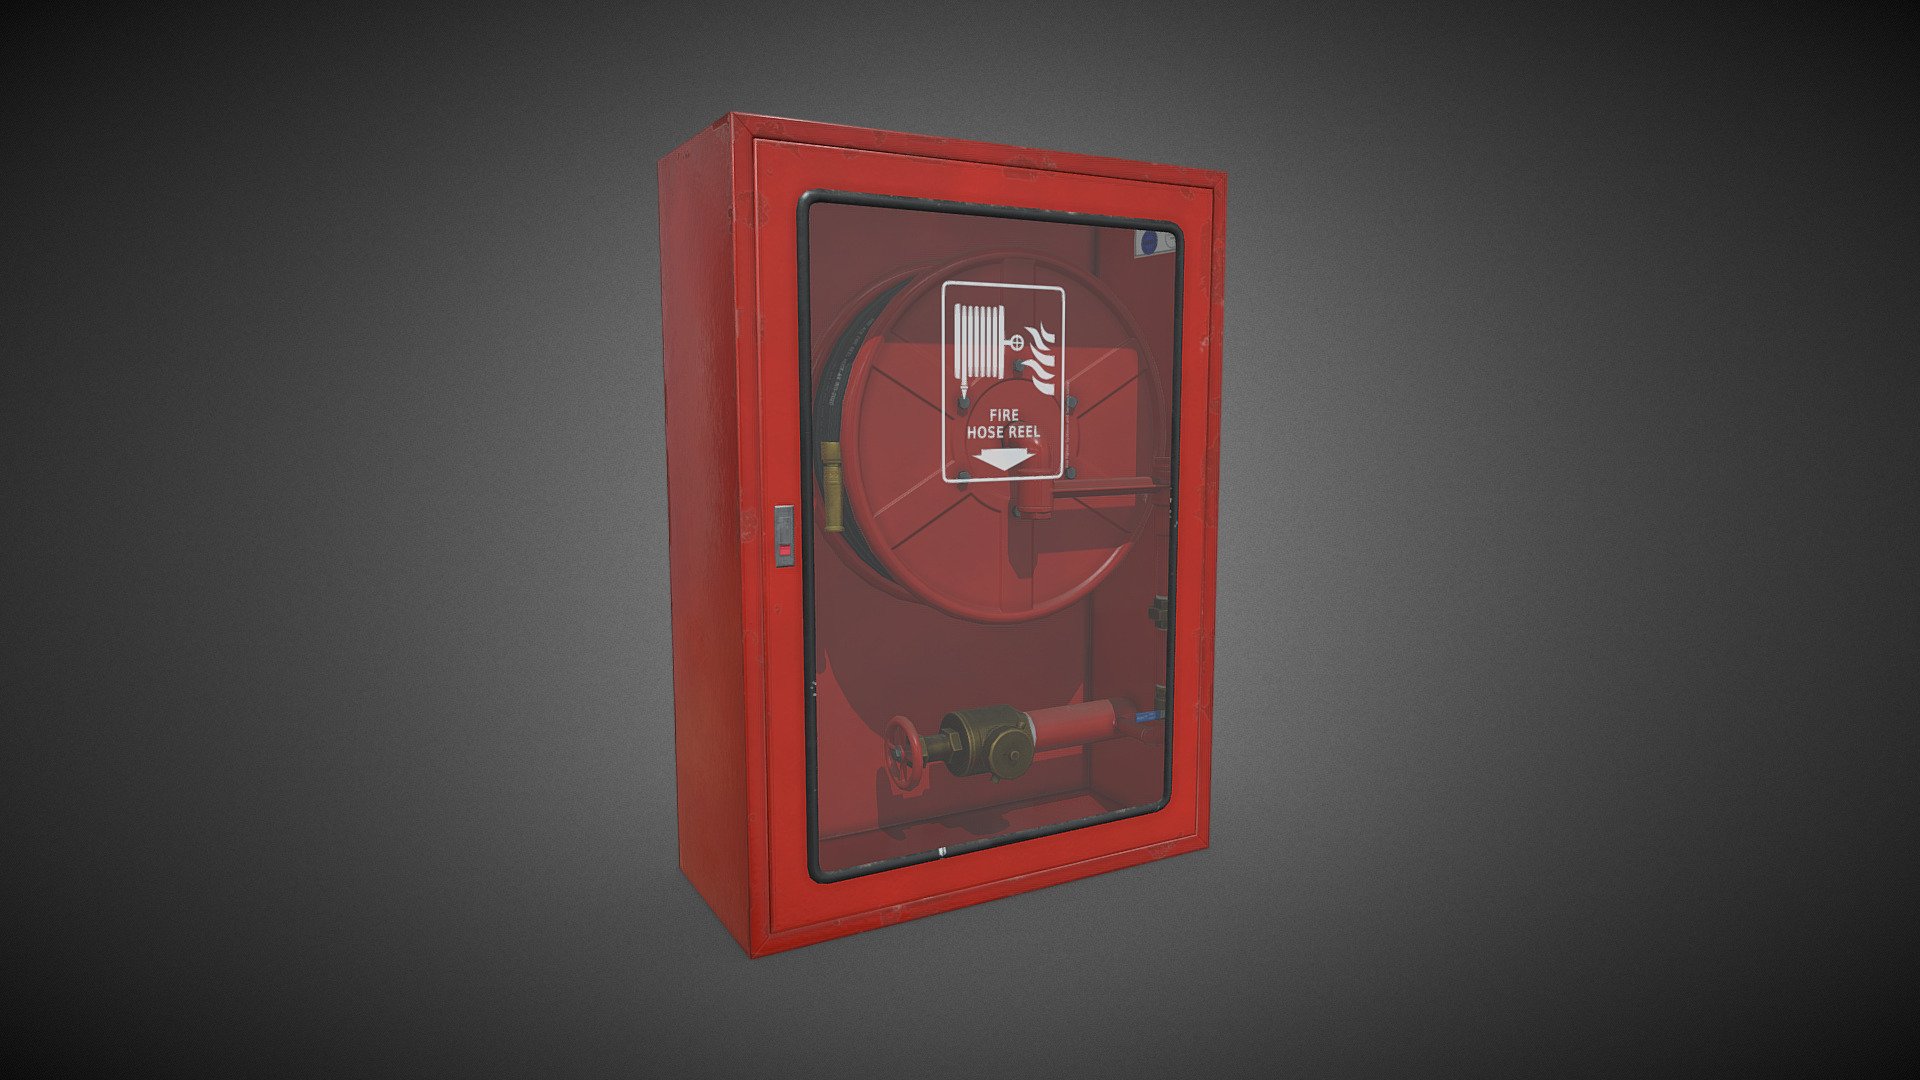 Highly detailed low poly model of a fire hose cabinet. Suitable for industrial visualization, simulators, and games.

Technical Features:




PBR Textures: base color with opacity in alpha channel (RGB+A), roughness, metallic, and normal map

Polys: 3.029 (5,823 tris)

Real-world scale based on references

All branding and labels are custom made

Formats included: .blend / .fbx / .obj

Textures:

This model includes 3 sets of PBR textures: old red cabinet (as seen on the viewer), a brand new red cabinet, and red textures for the hose reel. The additional set of textures for the cabinet are NOT included in the model as default; they need to be setup manually.




Number of textures: 12

Texture format: PNG

Texture size: 4096 x 4096

The model can be used in any game, personal project, ArchViz, etc. It may not be reselled or redistributed 3d model